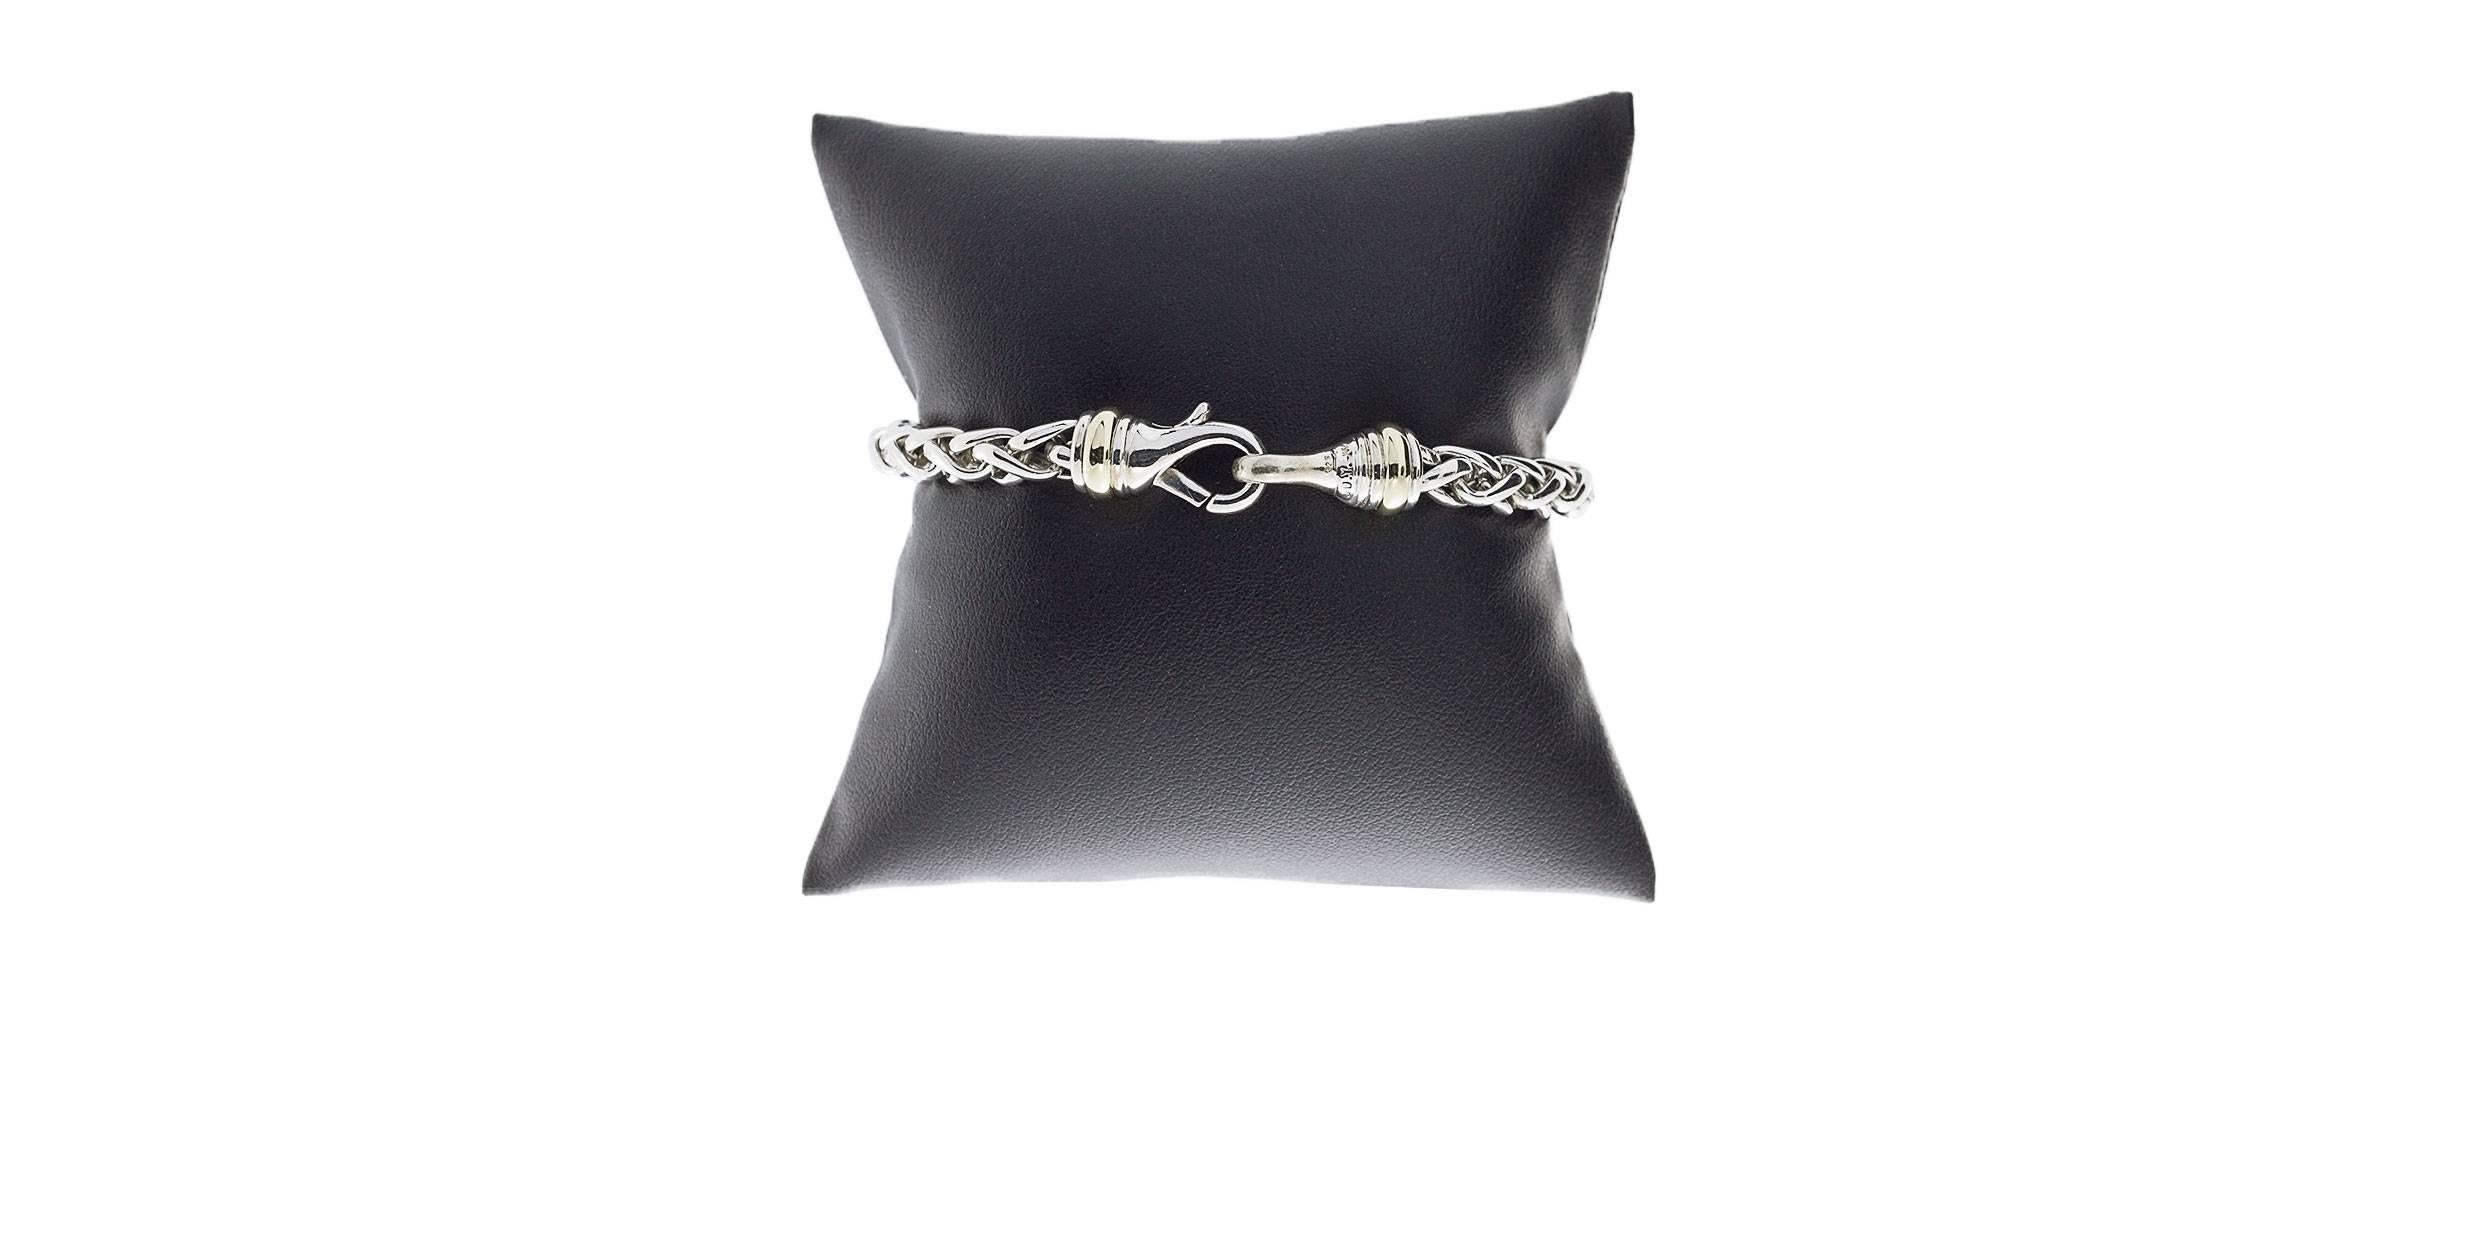 This beautiful bracelet is from David Yurman, a legend in the jewelry business. This versatile, wheat chain bracelet is comprised of sterling silver with 14 karat yellow gold accents. It is 7.75